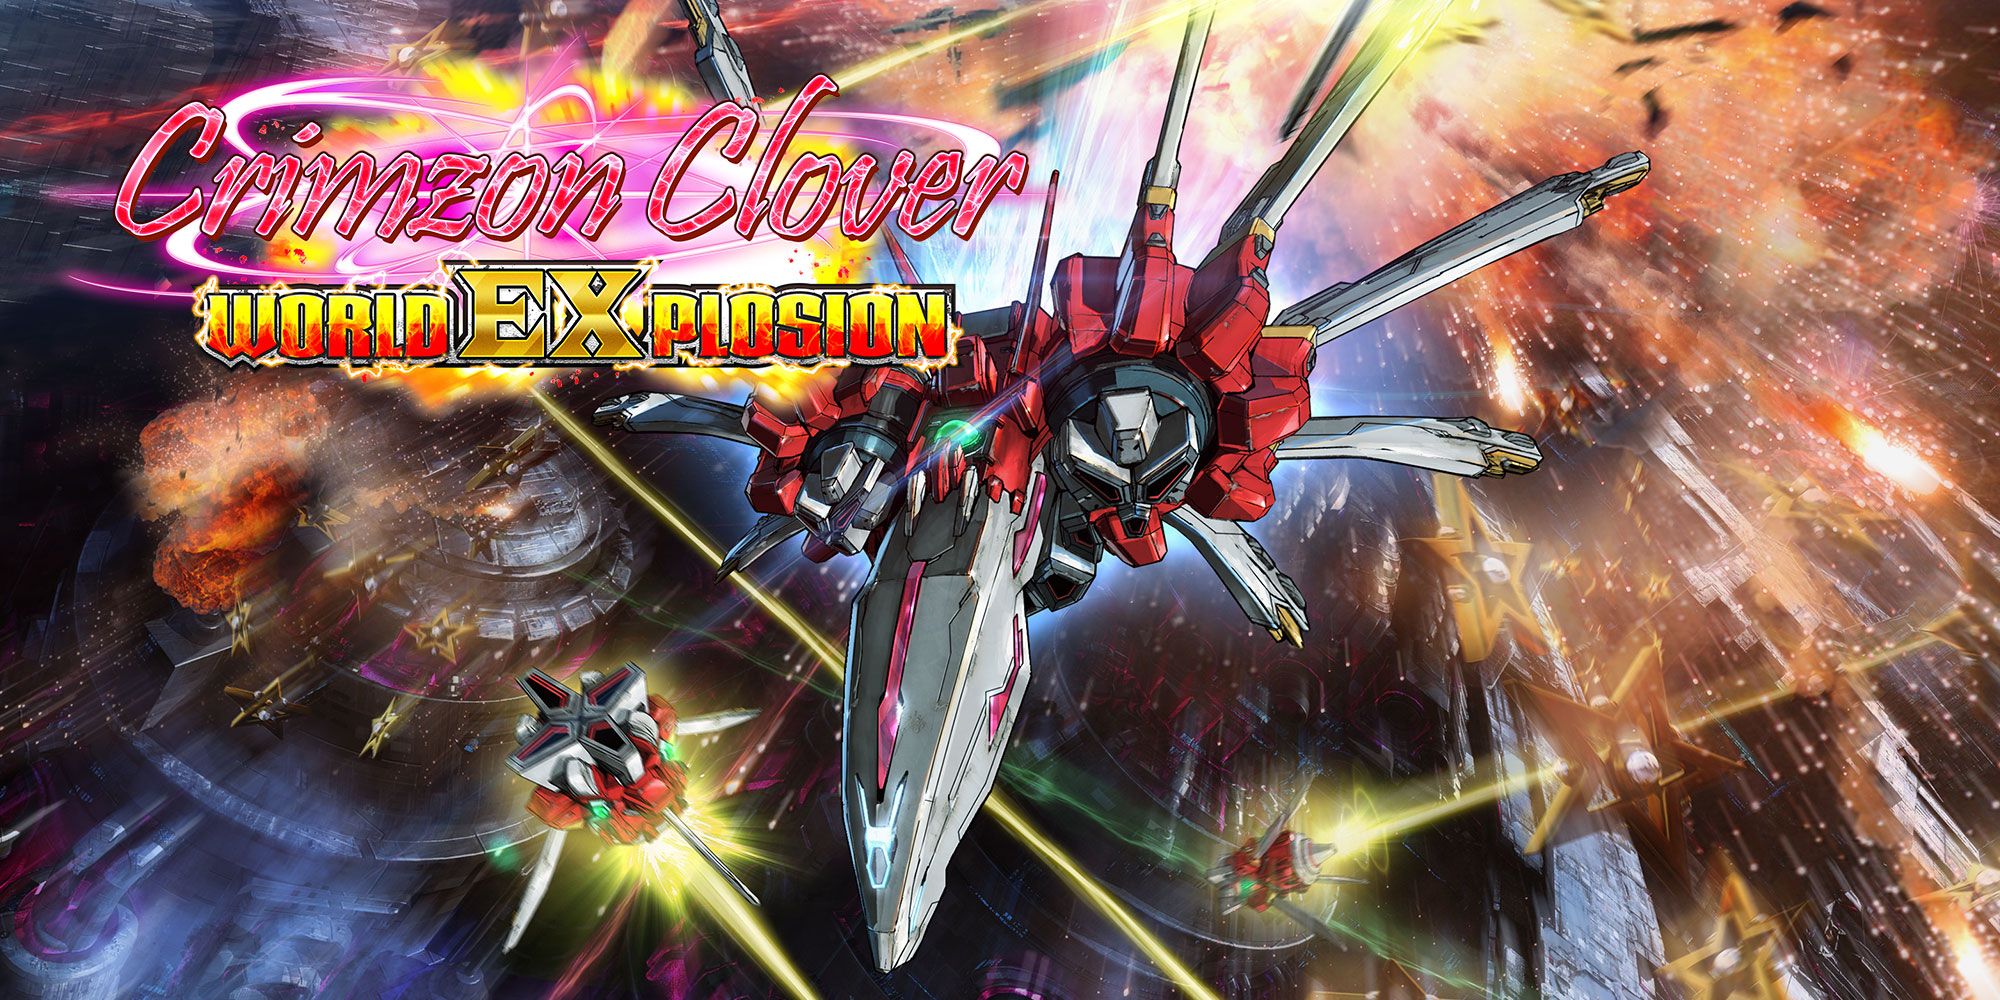 Crimzon Clover World EXplosion Art showing Type-1 and Options flying towards screen